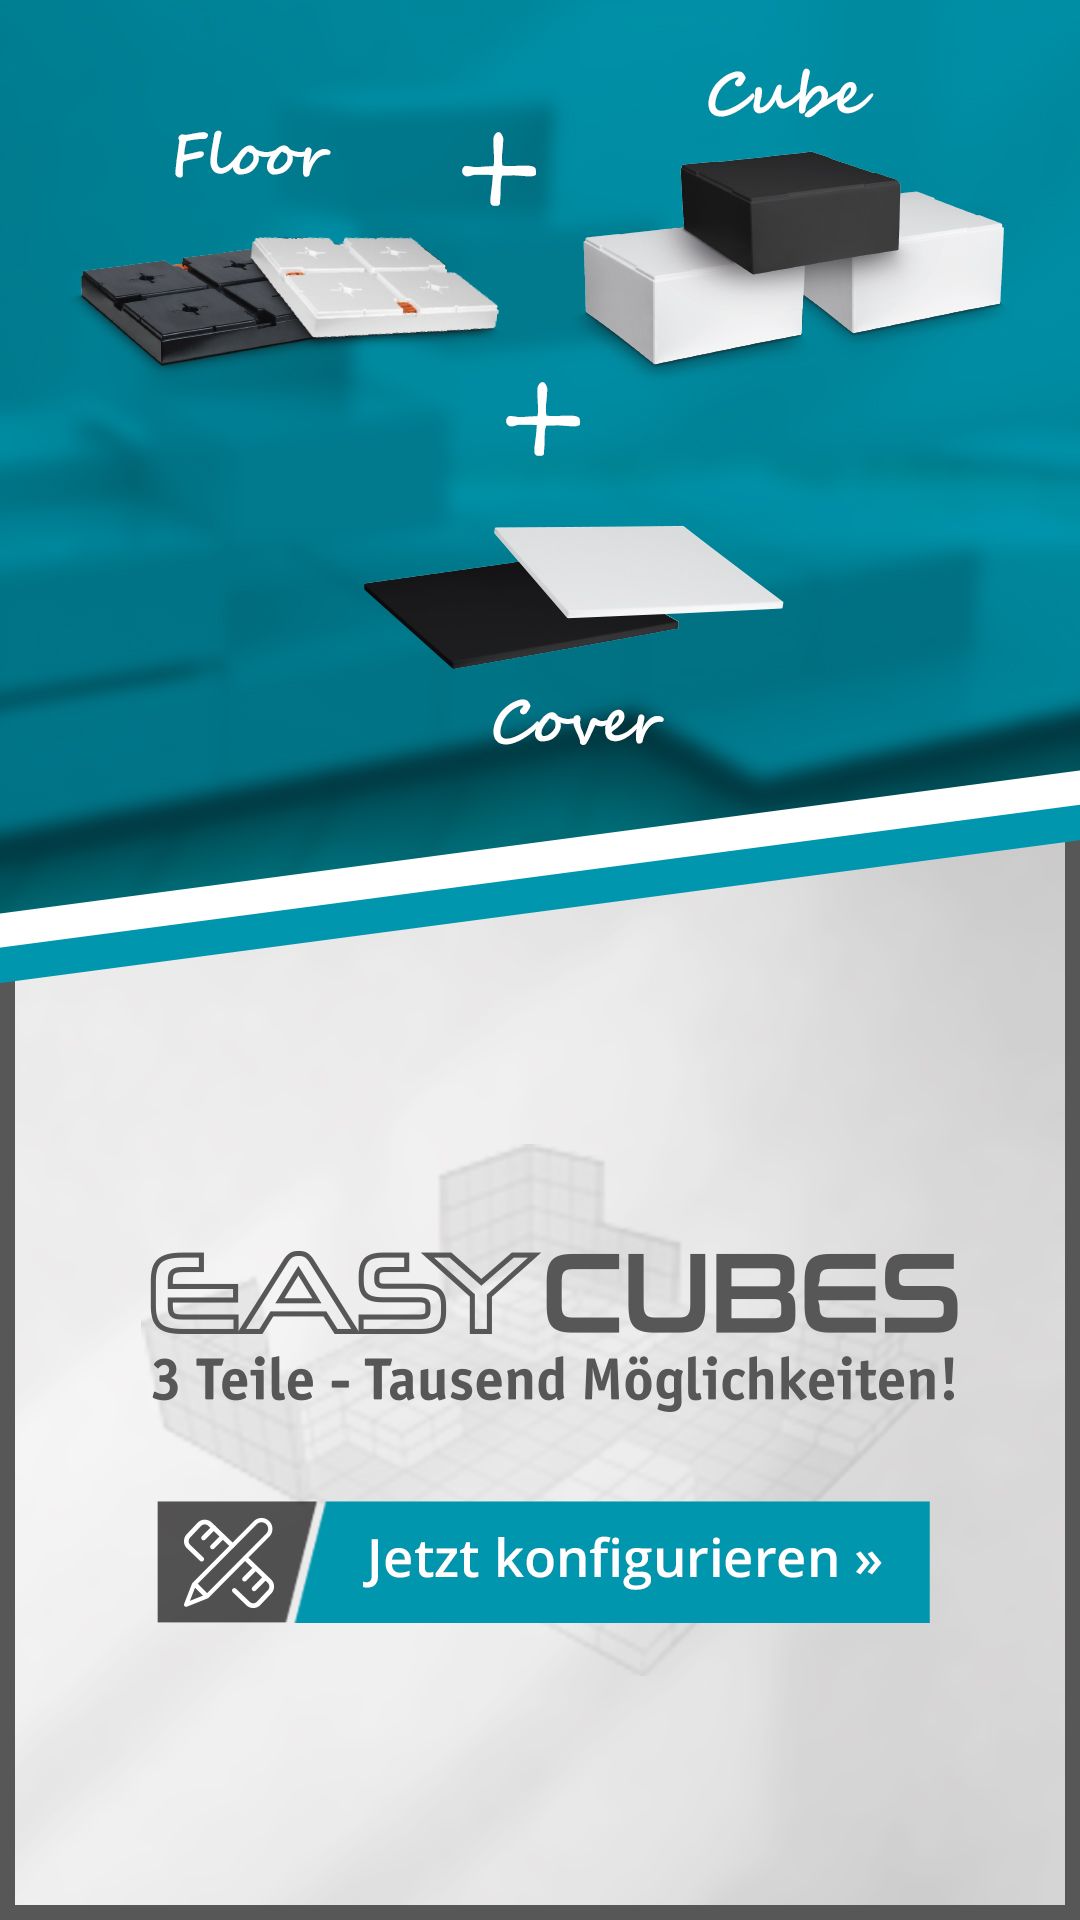 Easy Cubes product presentation system Components for configuration